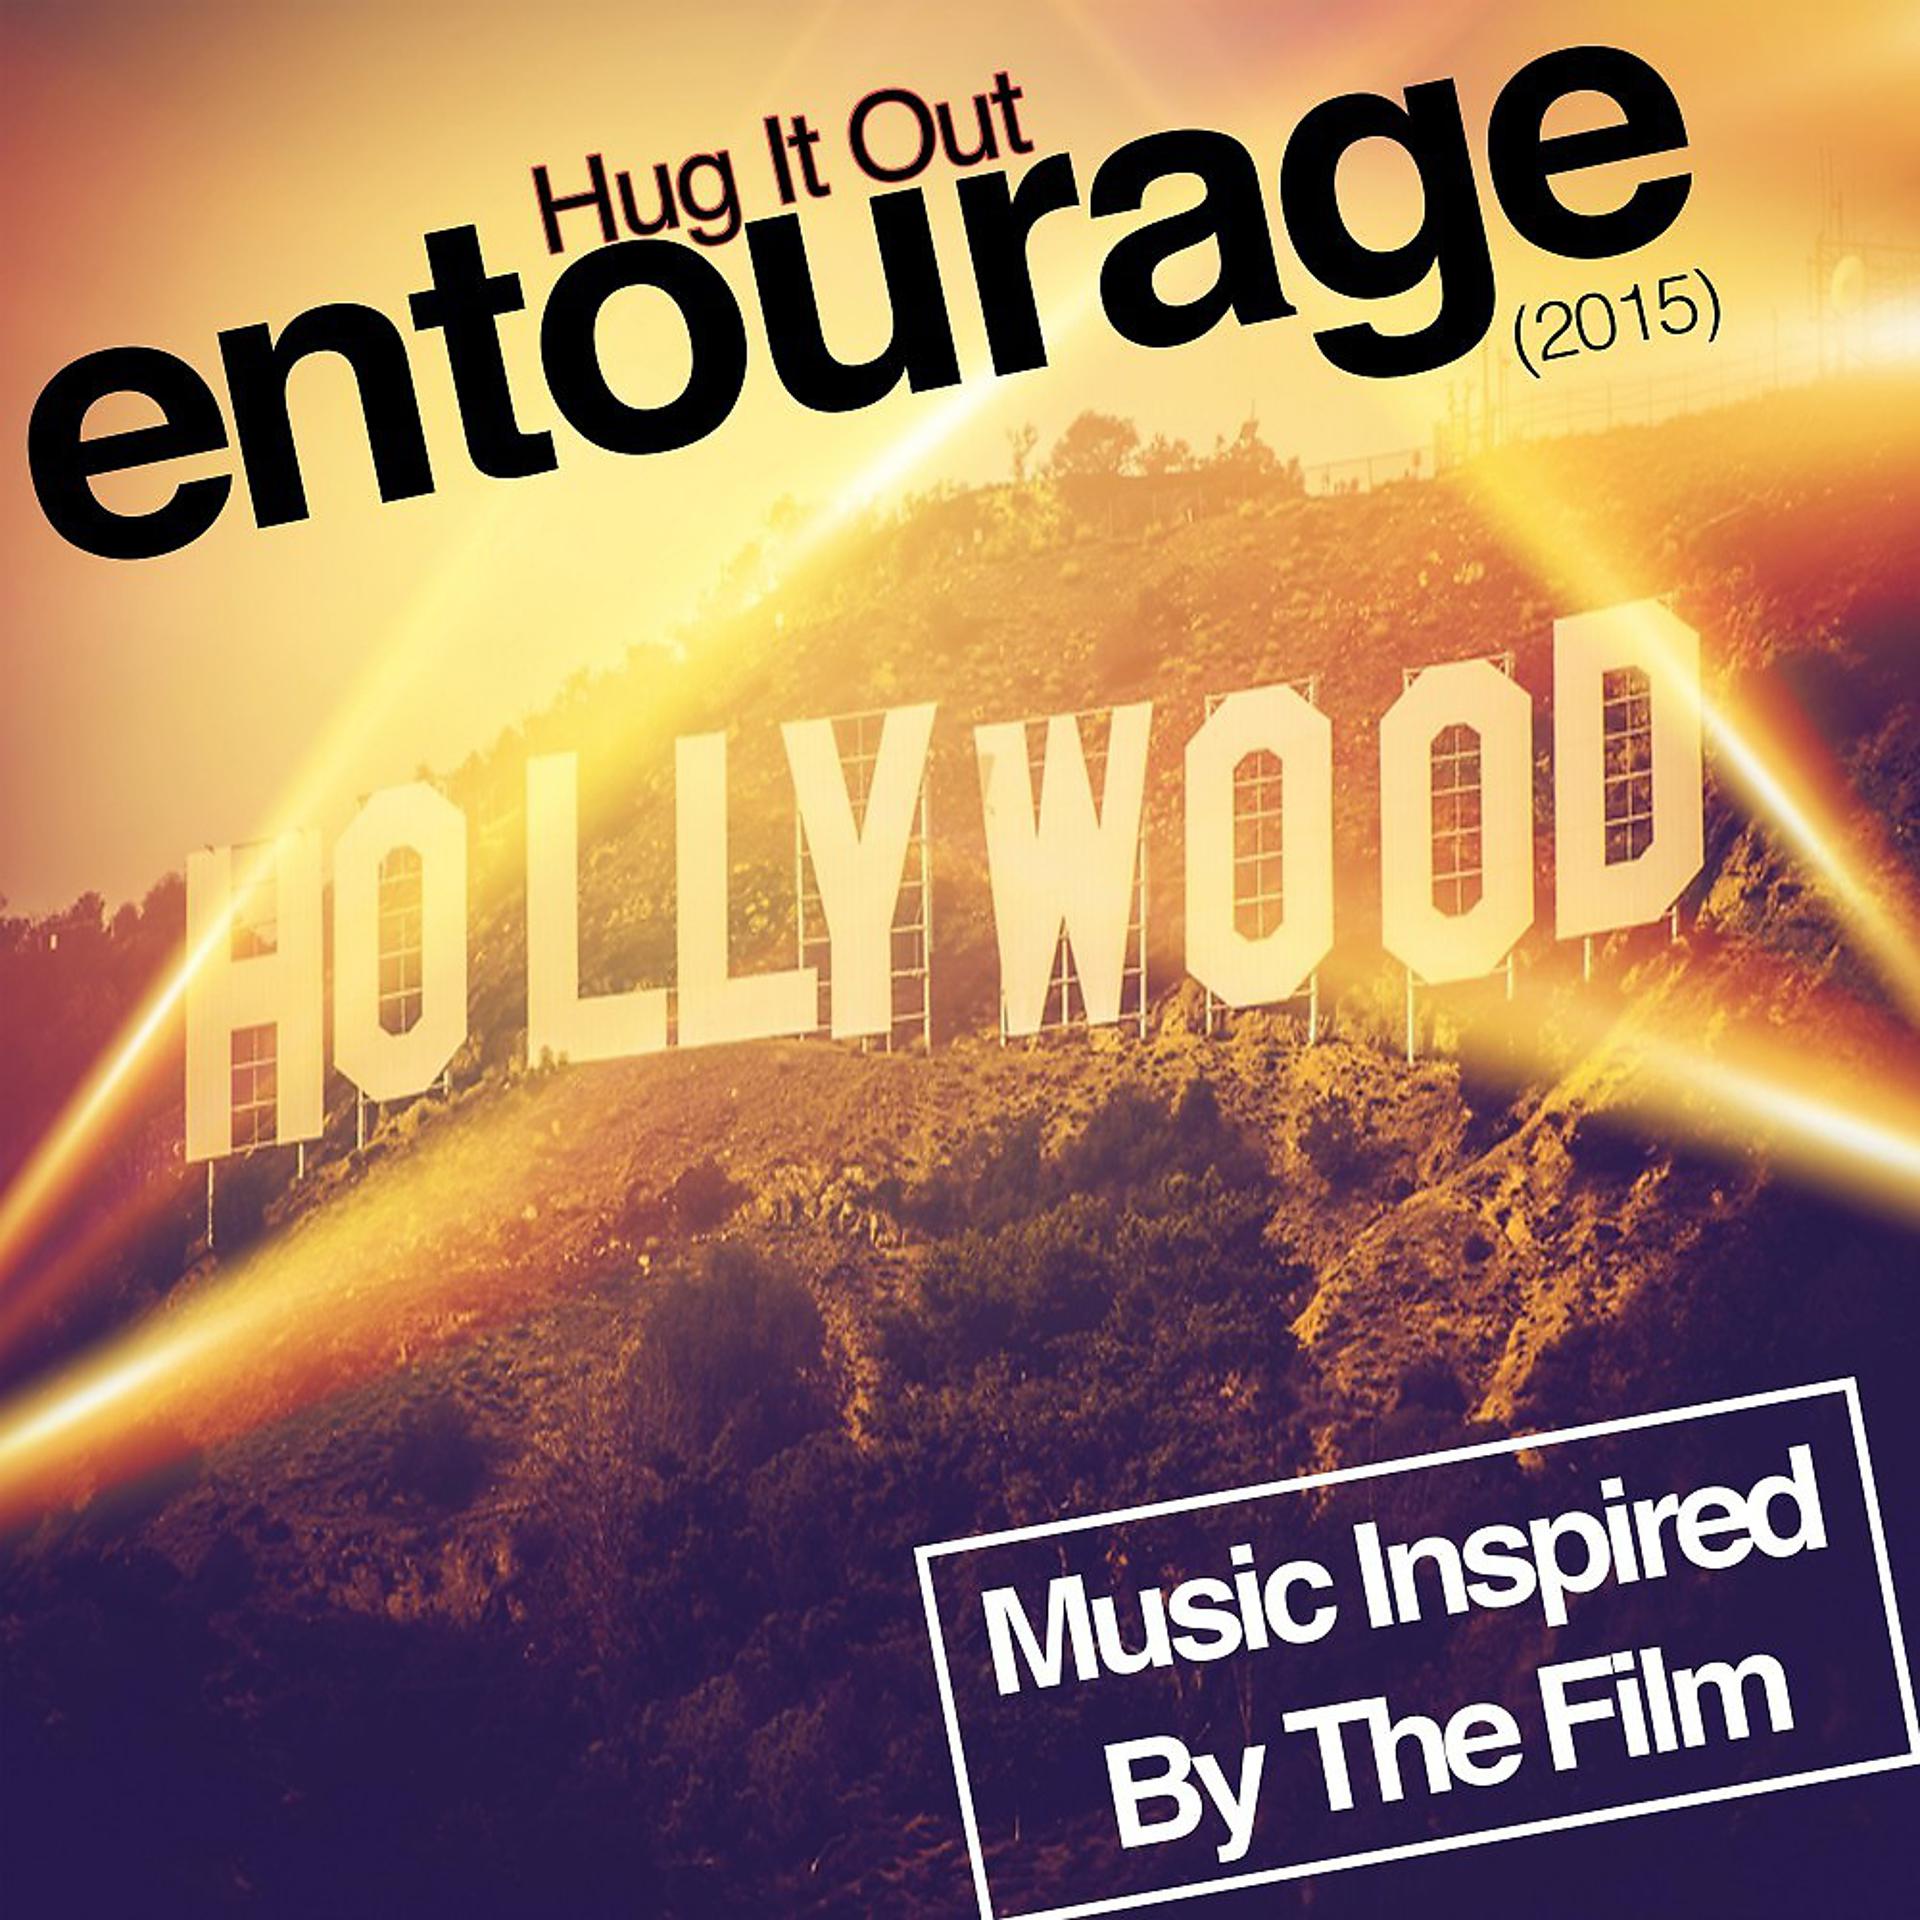 Постер альбома Music Inspired by the Film: Entourage (2015) Hug It Out